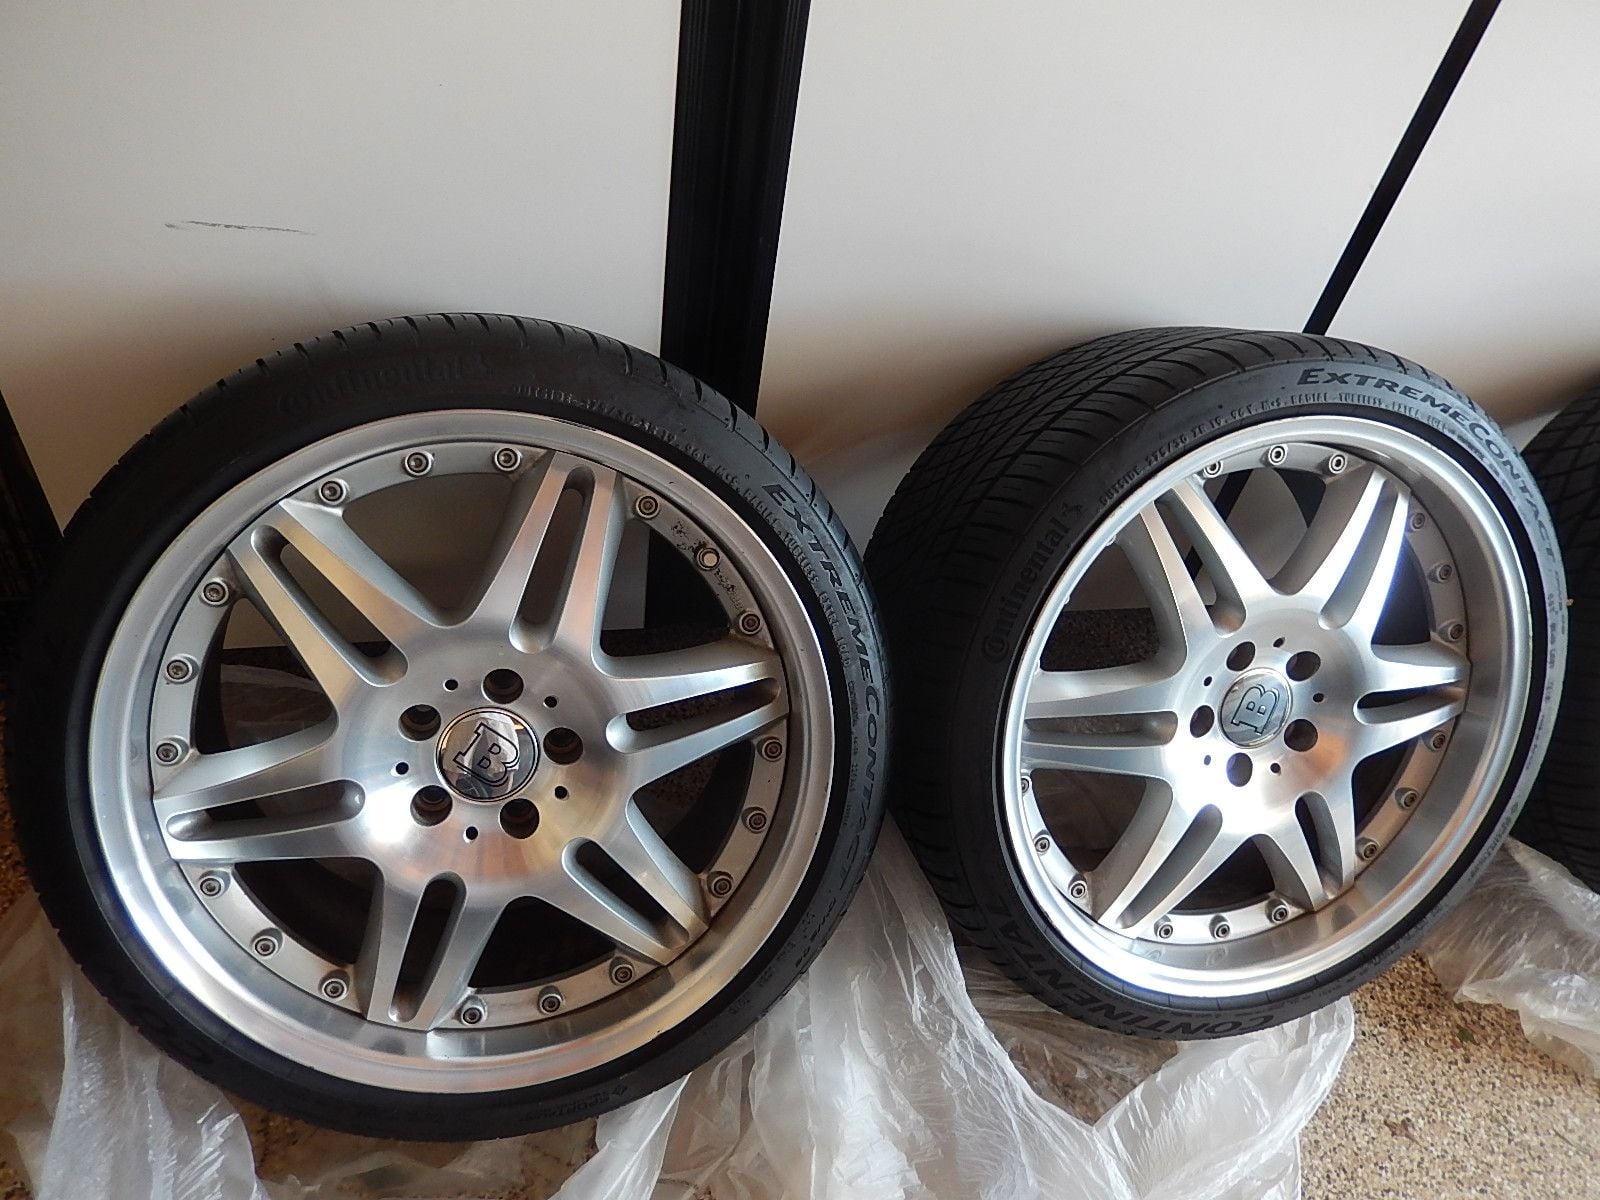 Wheels and Tires/Axles - 19" Authentic BRABUS Monoblock VI 2-Piece Wheels and New Continental Tires - Used - 1999 to 2018 Mercedes-Benz All Models - Orange County, CA 92618, United States